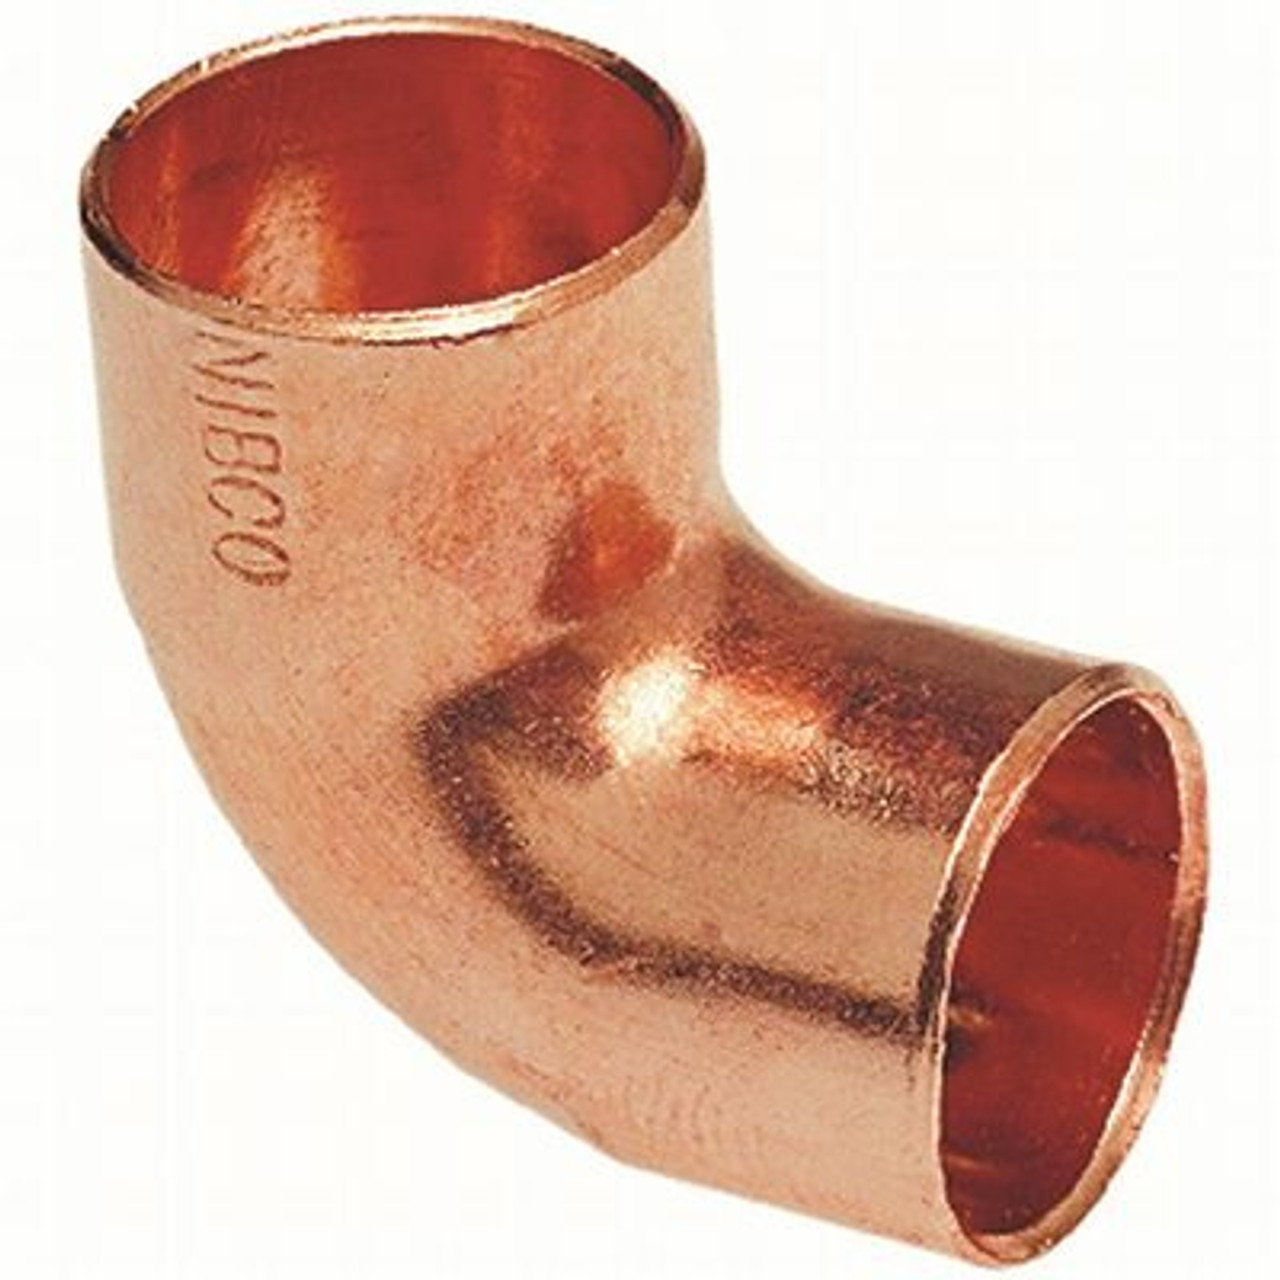 Nibco 3/4 In. Wrot Copper 90-Degree Cup X Cup Elbow Fitting Pro Pack (25-Pack)